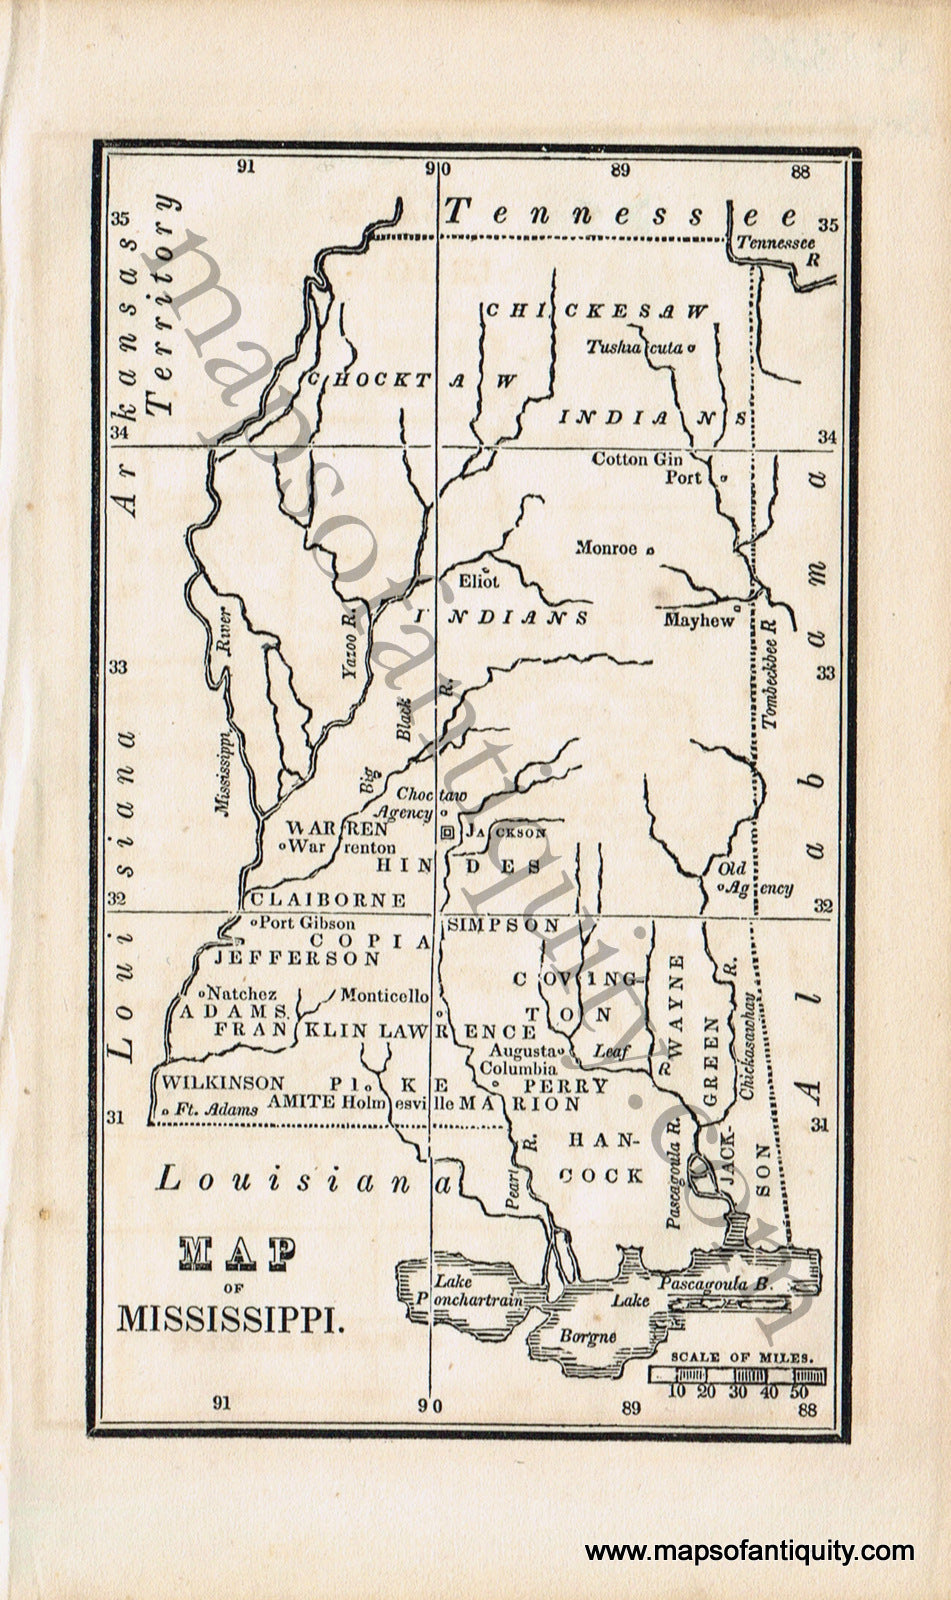 Antique-Black-and-White-Map-Map-of-Mississippi-United-States-South-1830-Boston-School-Geography-Maps-Of-Antiquity